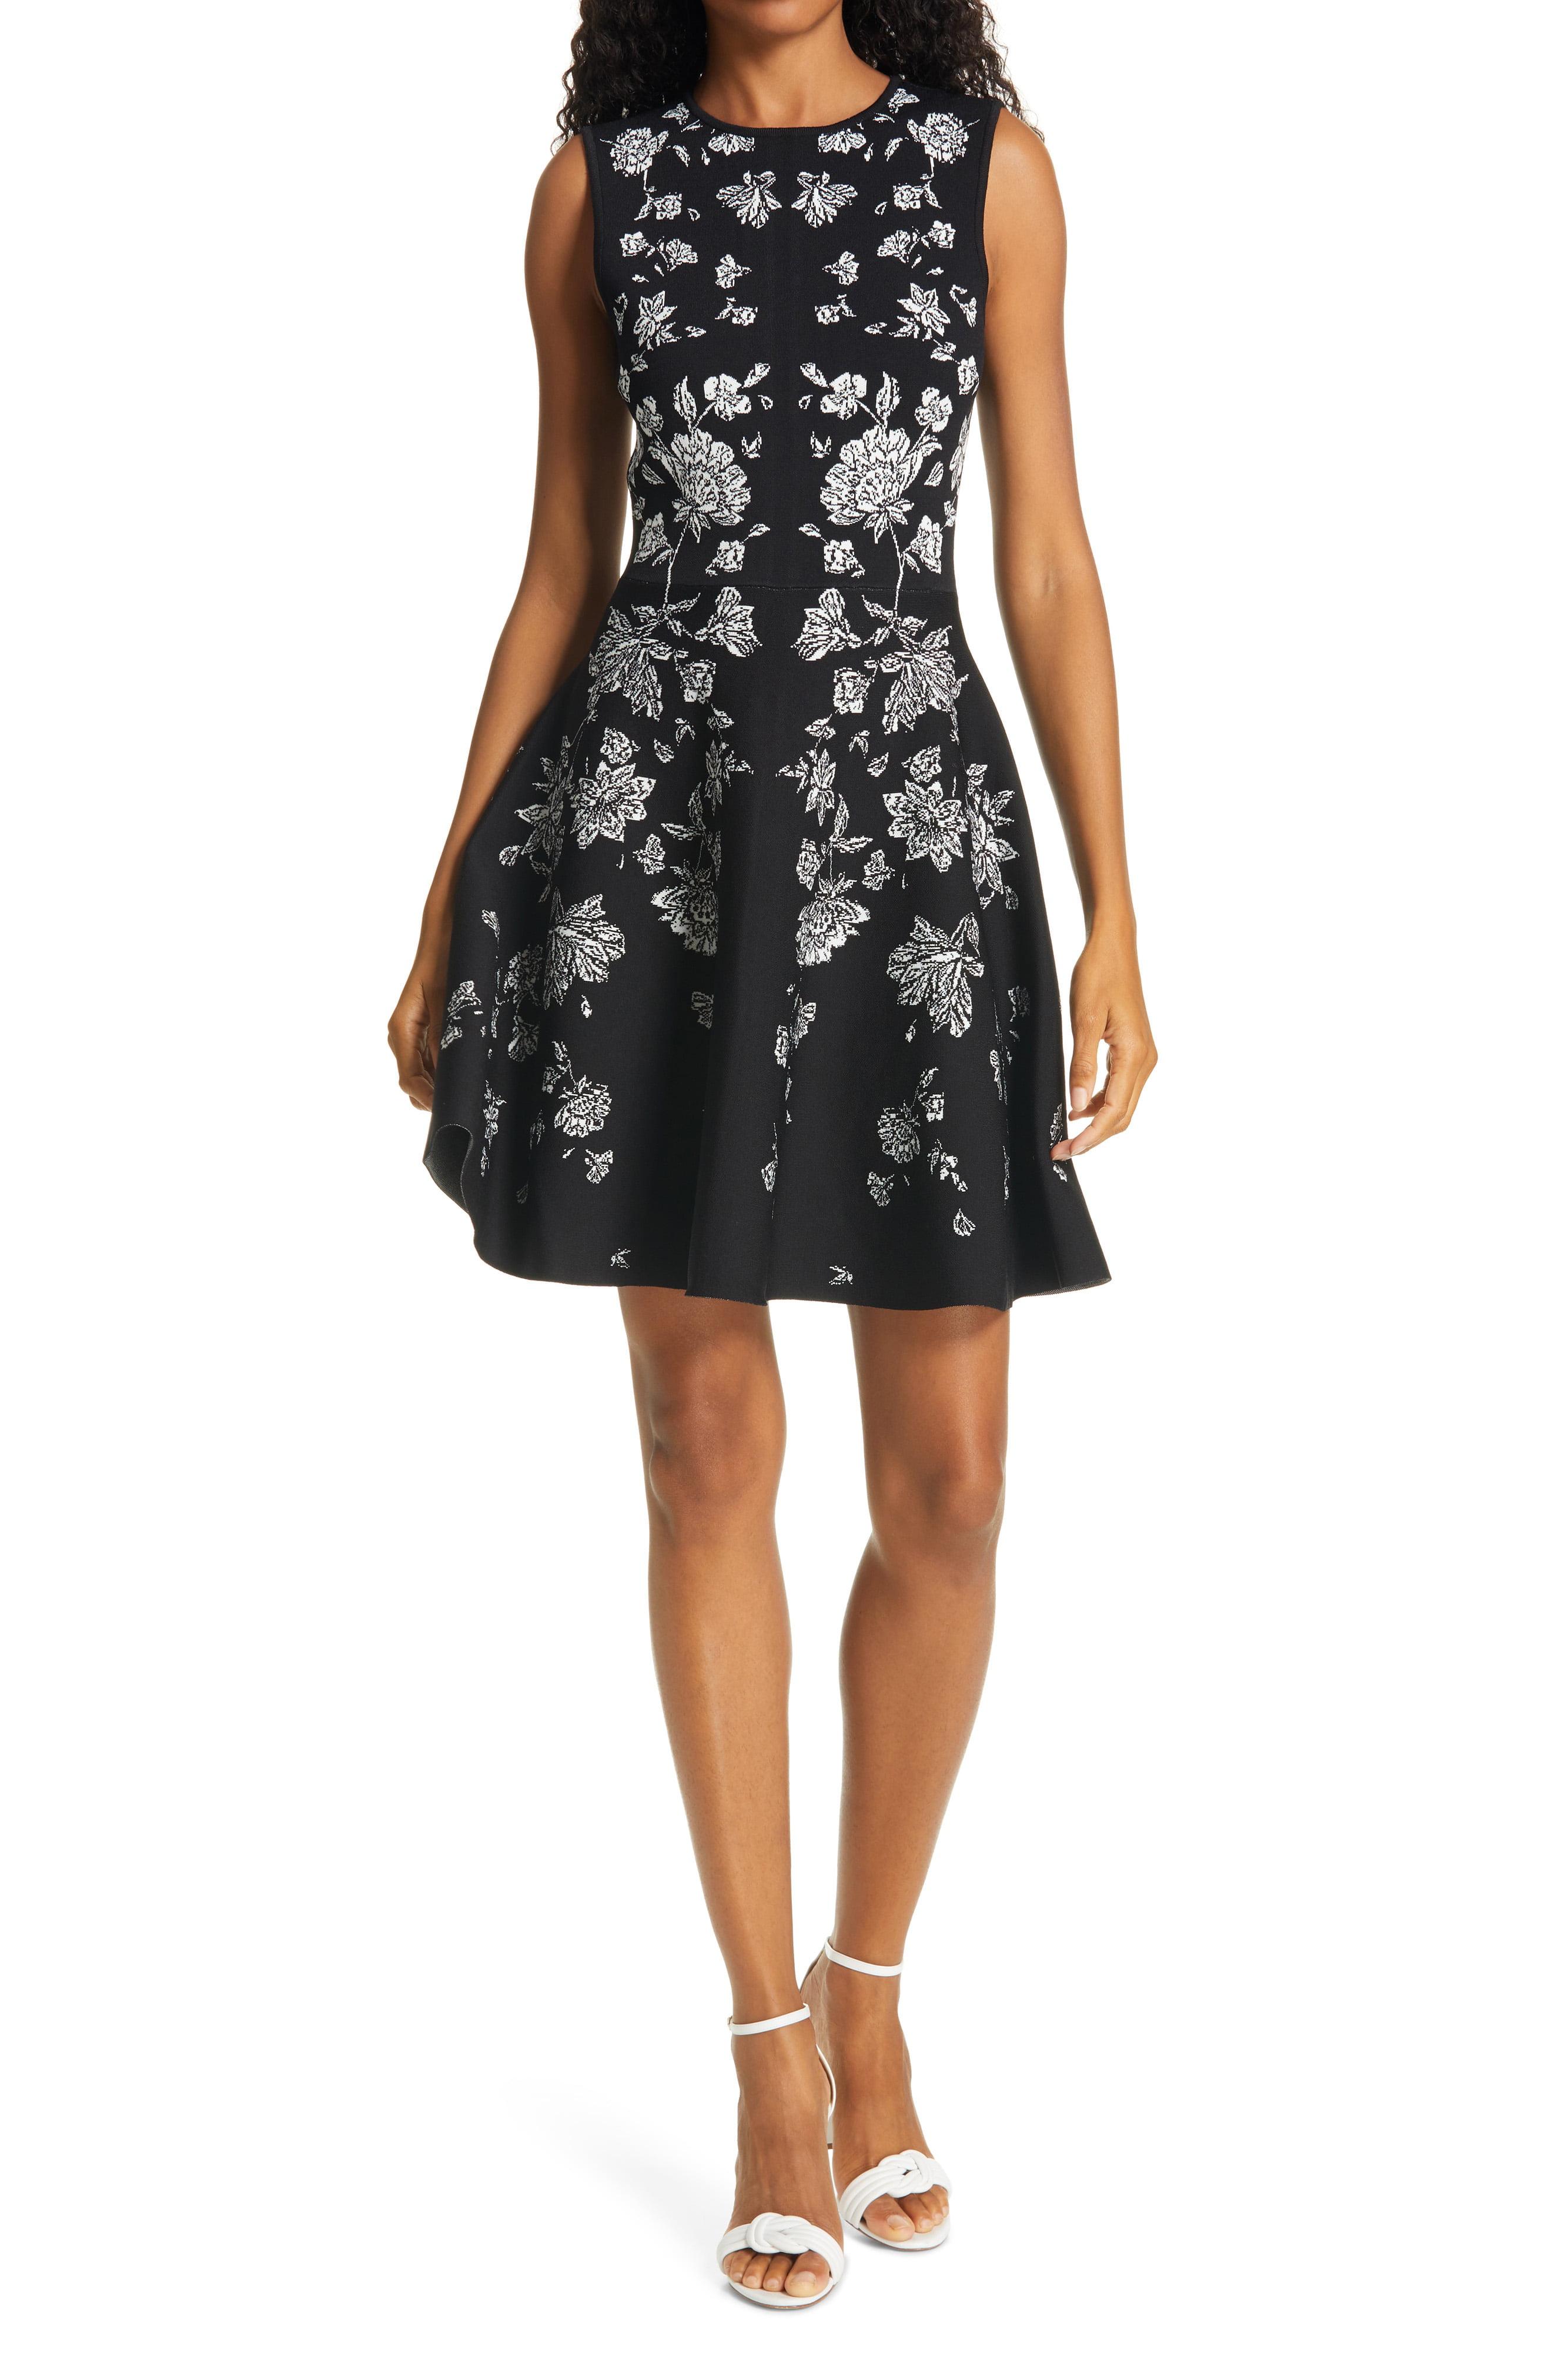 Ted Baker Naomyy Floral Jacquard Fit & Flare Dress in Black - Lyst